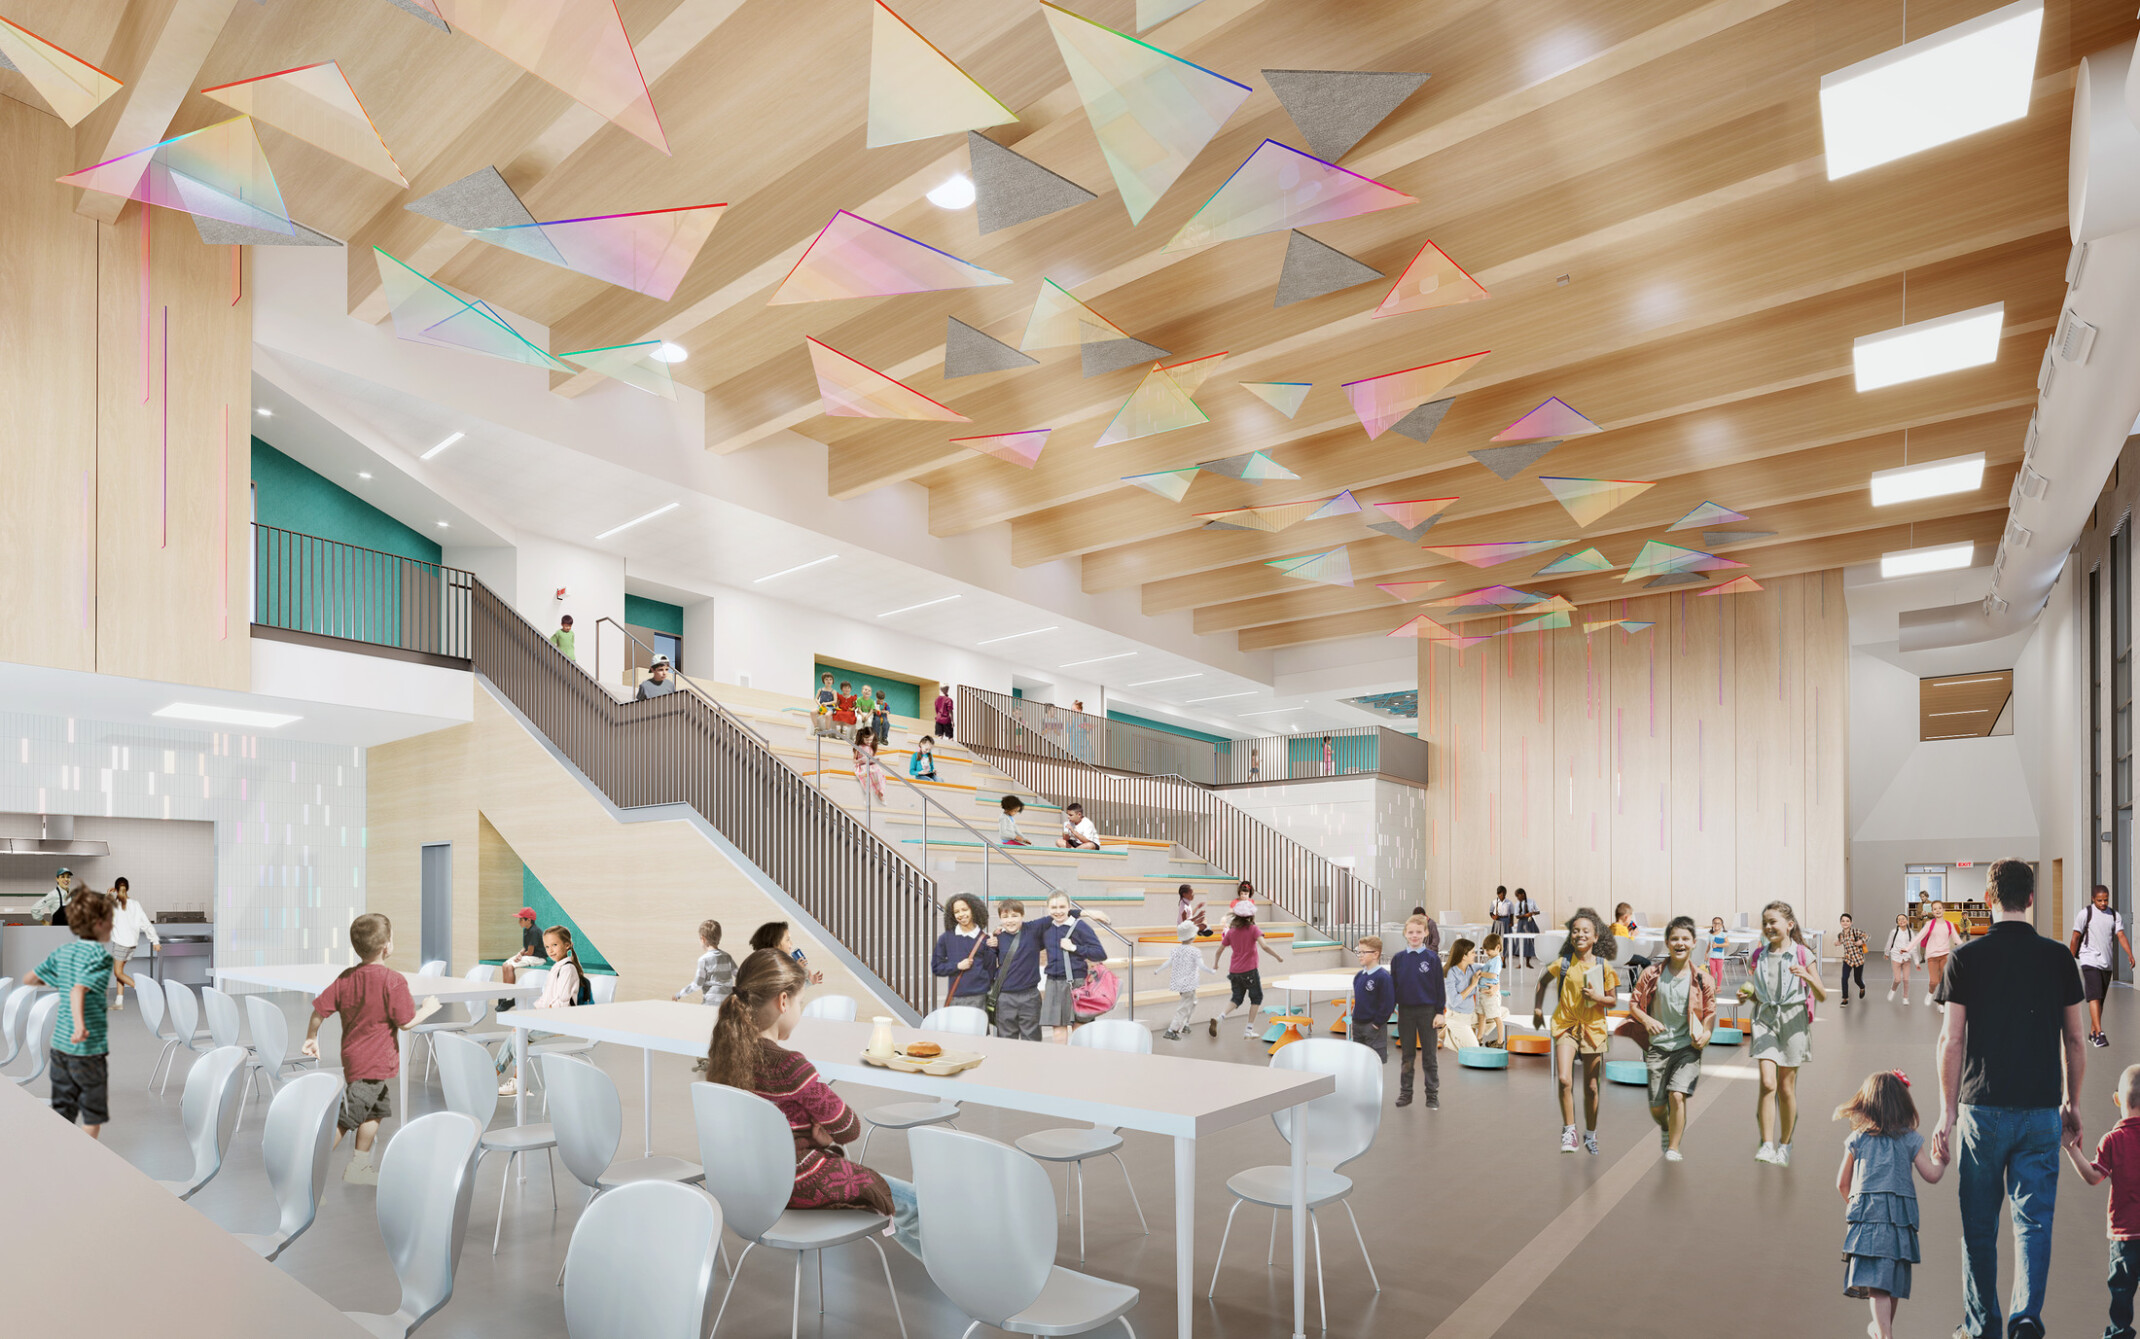 interior of entrance, high ceilings, ceiling has suspended glass triangles, stairs sectioned into climbing and seating areas, light wood ceiling beams and wall panels, teal accent walls, square skylights provide natural light for sense of well-being, people seated and walking